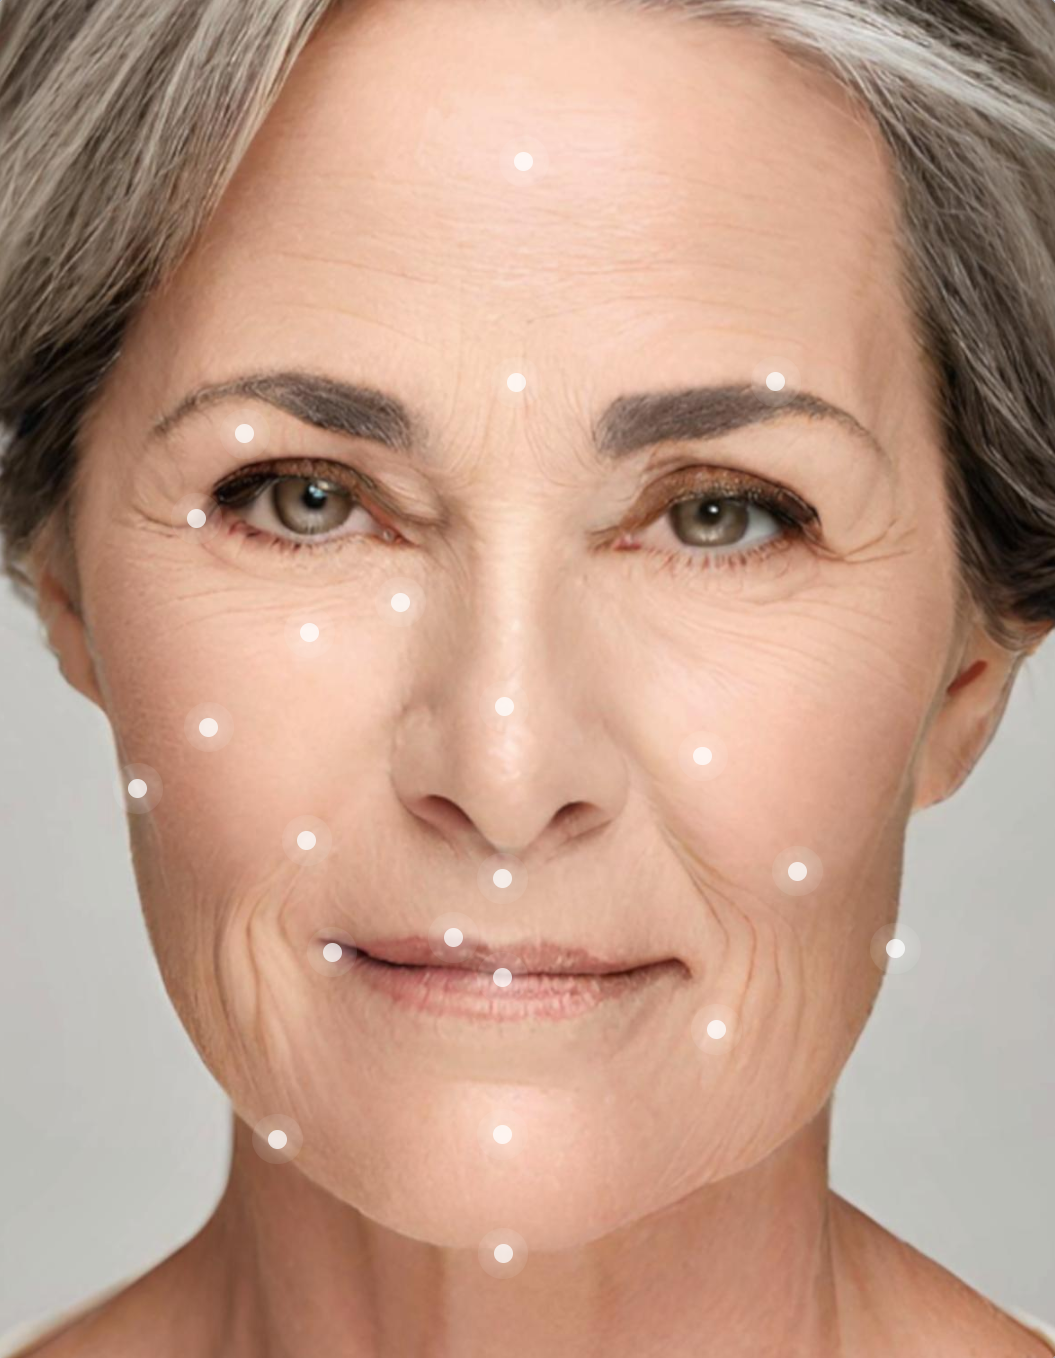 patient with Beautymapper dots on face regions